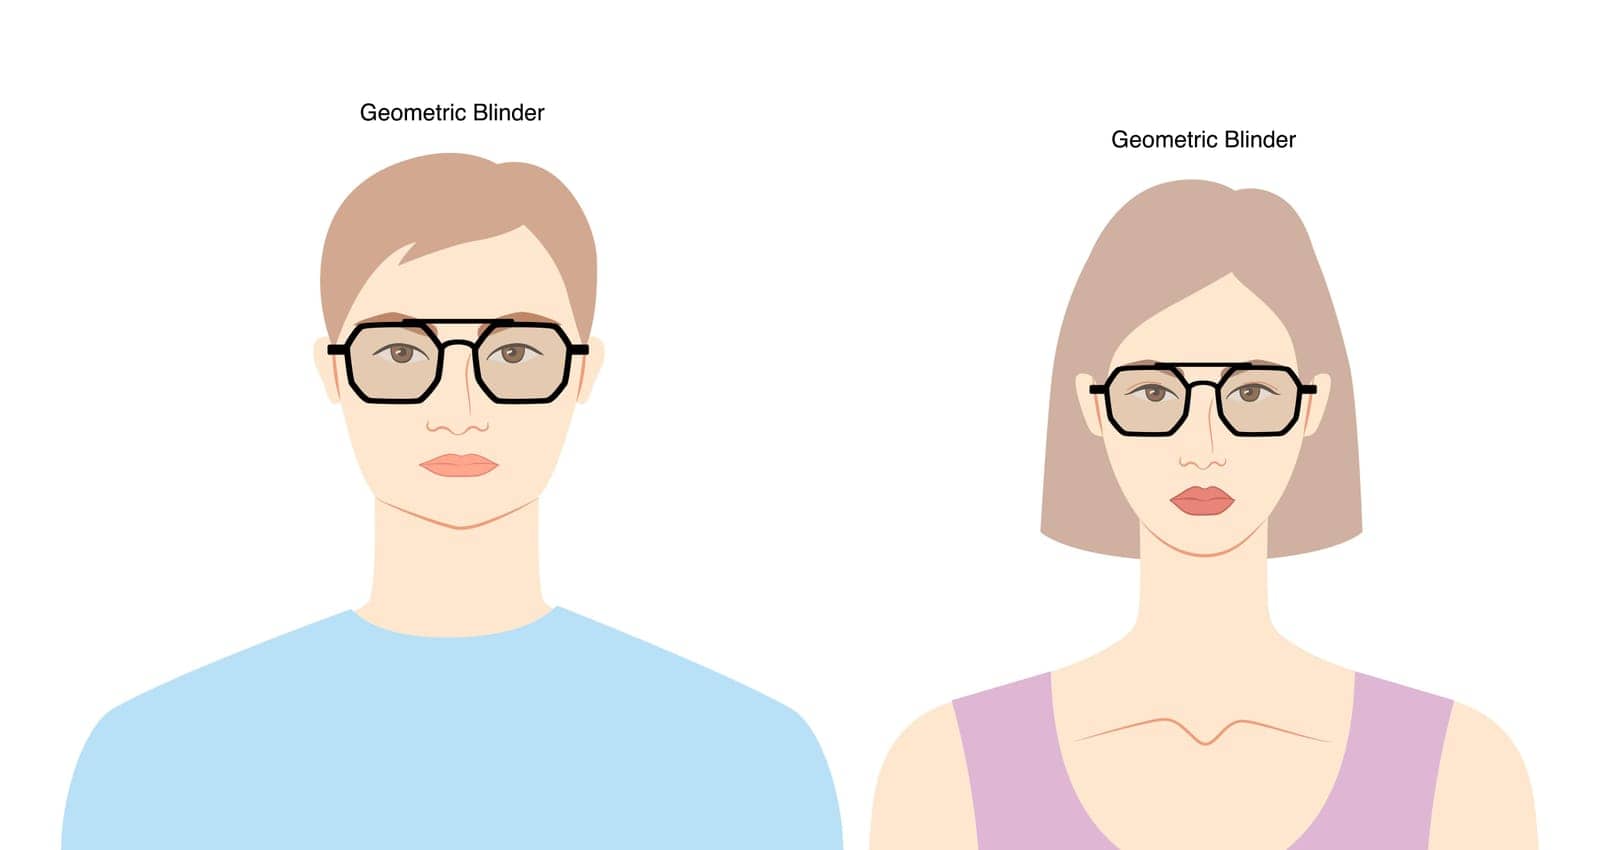 Geometric Blinder frame glasses on women and men flat character fashion accessory illustration. Sunglass silhouette by Vectoressa